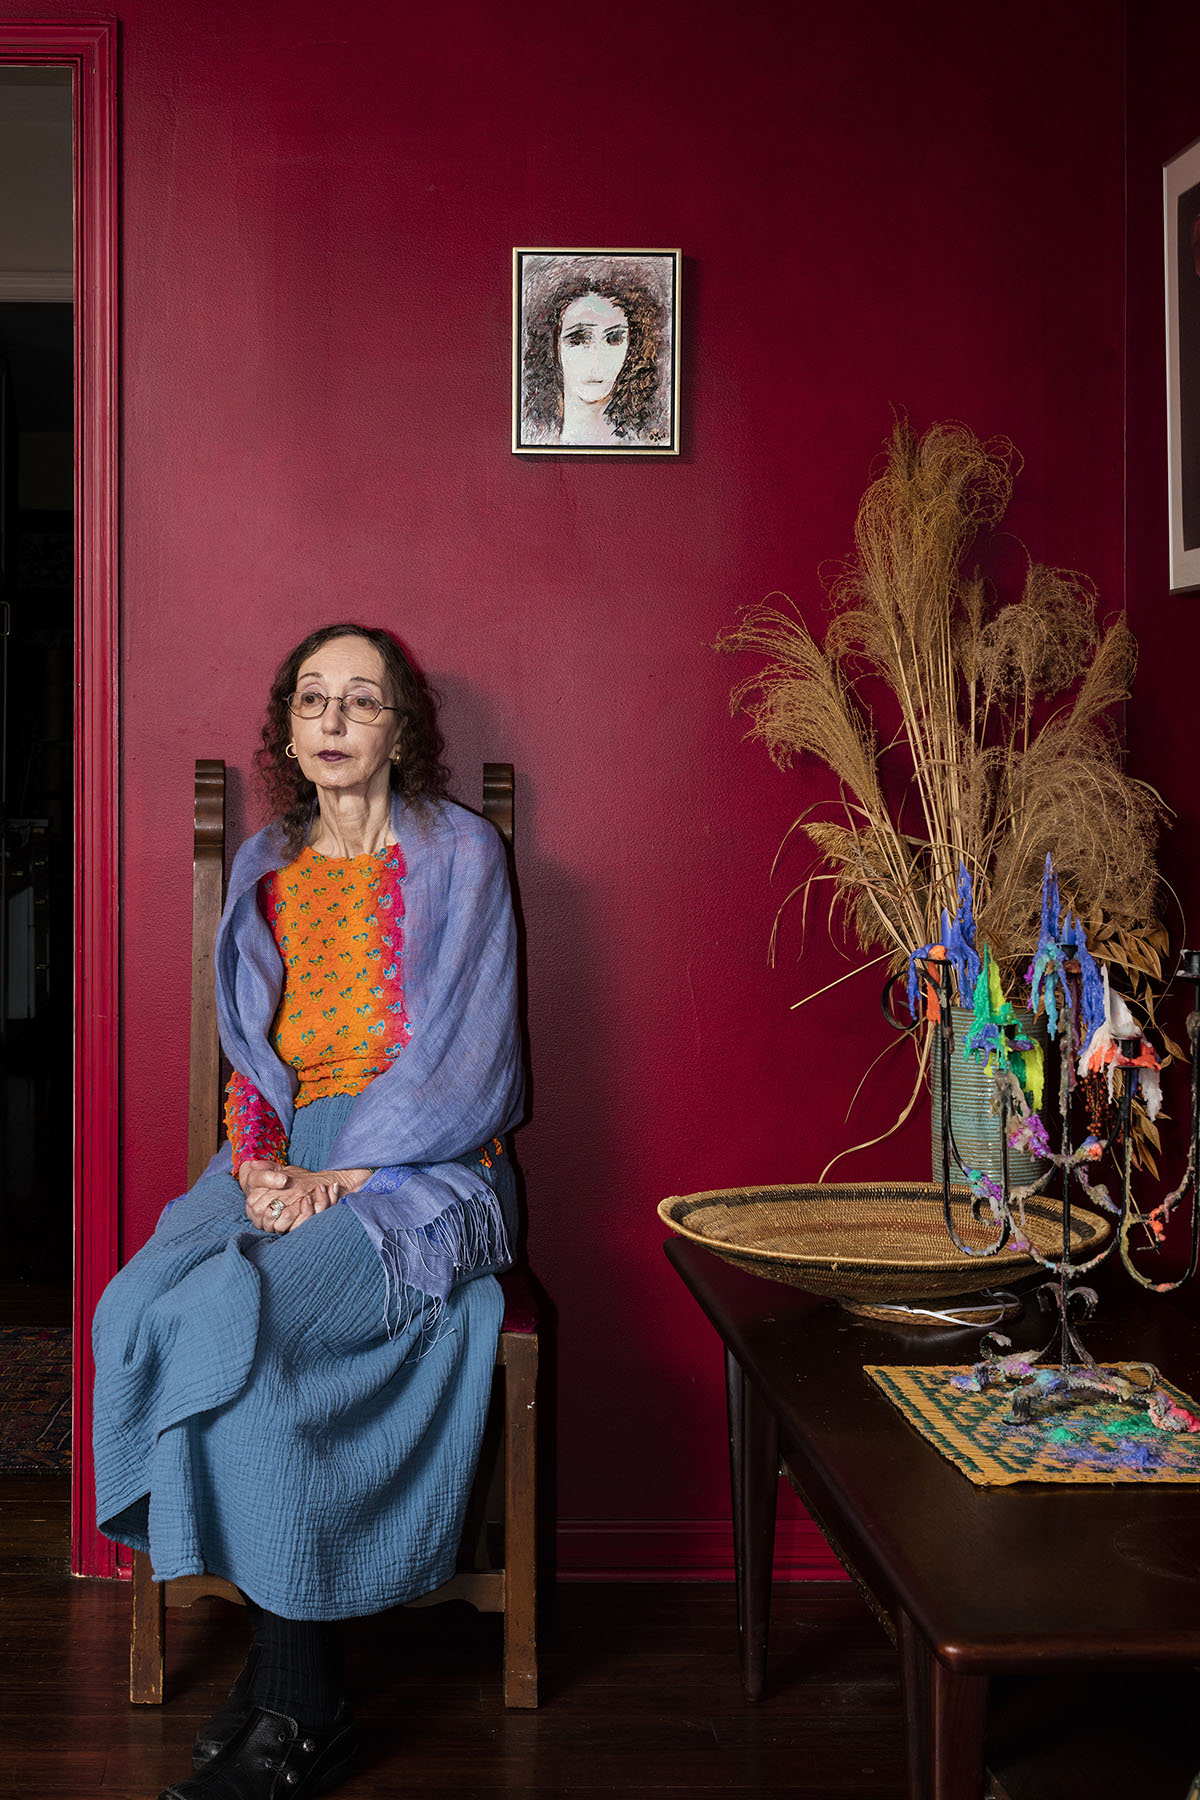 Portrait of Joyce Carol Oates sitting on a chair in front of a red wall.